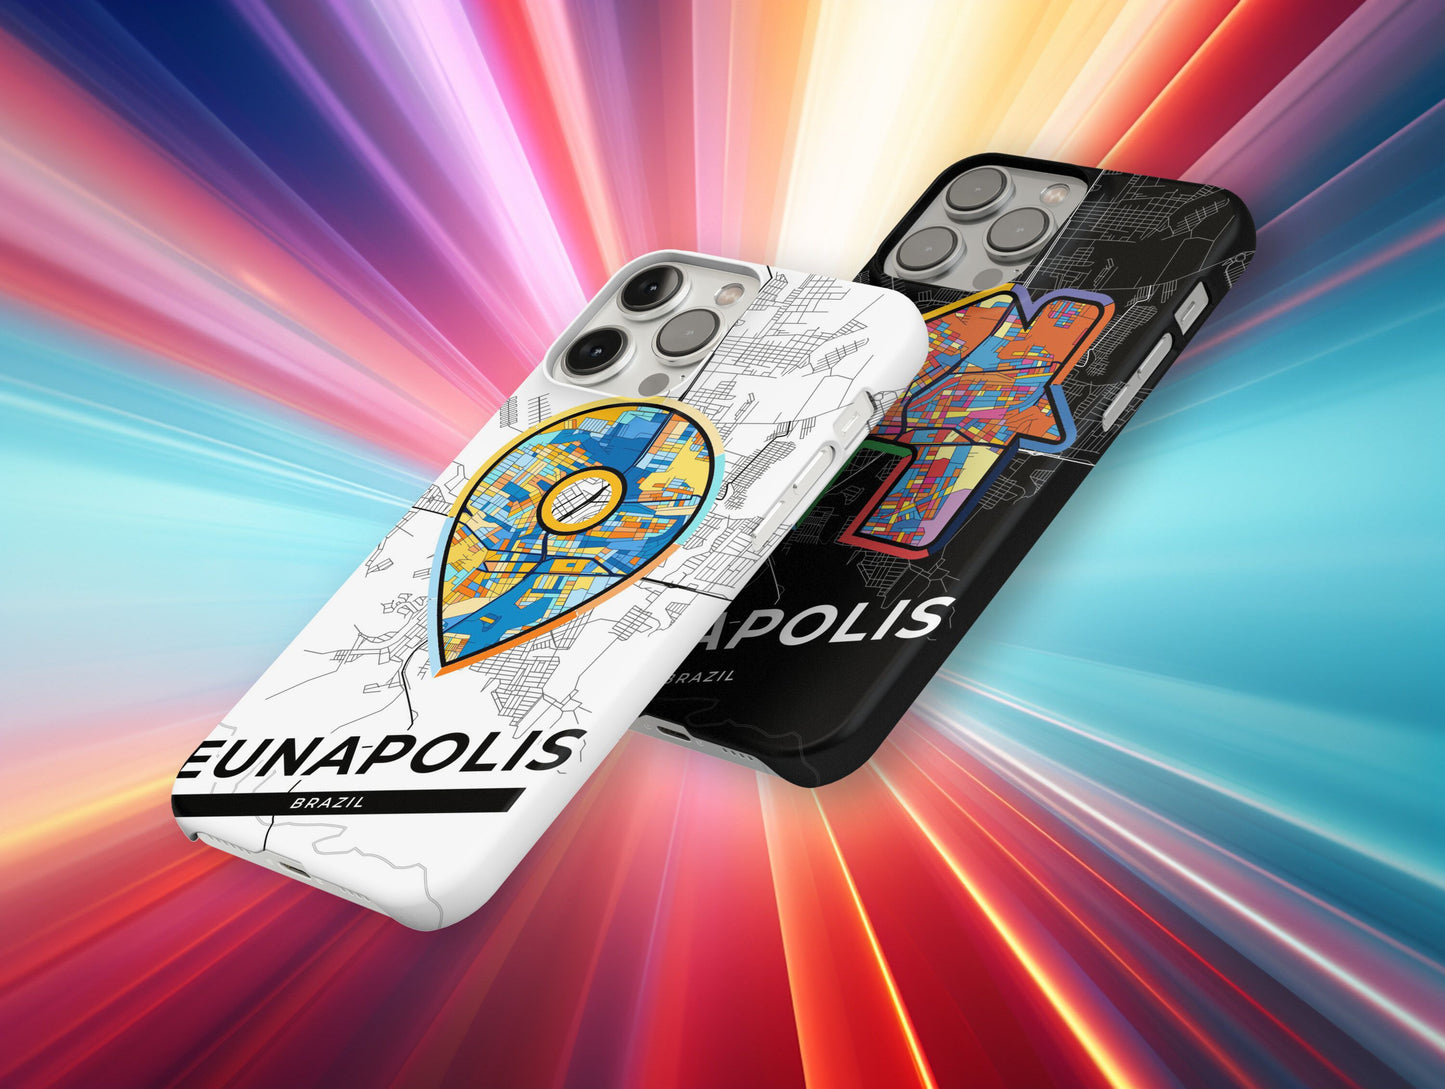 Eunapolis Brazil slim phone case with colorful icon. Birthday, wedding or housewarming gift. Couple match cases.